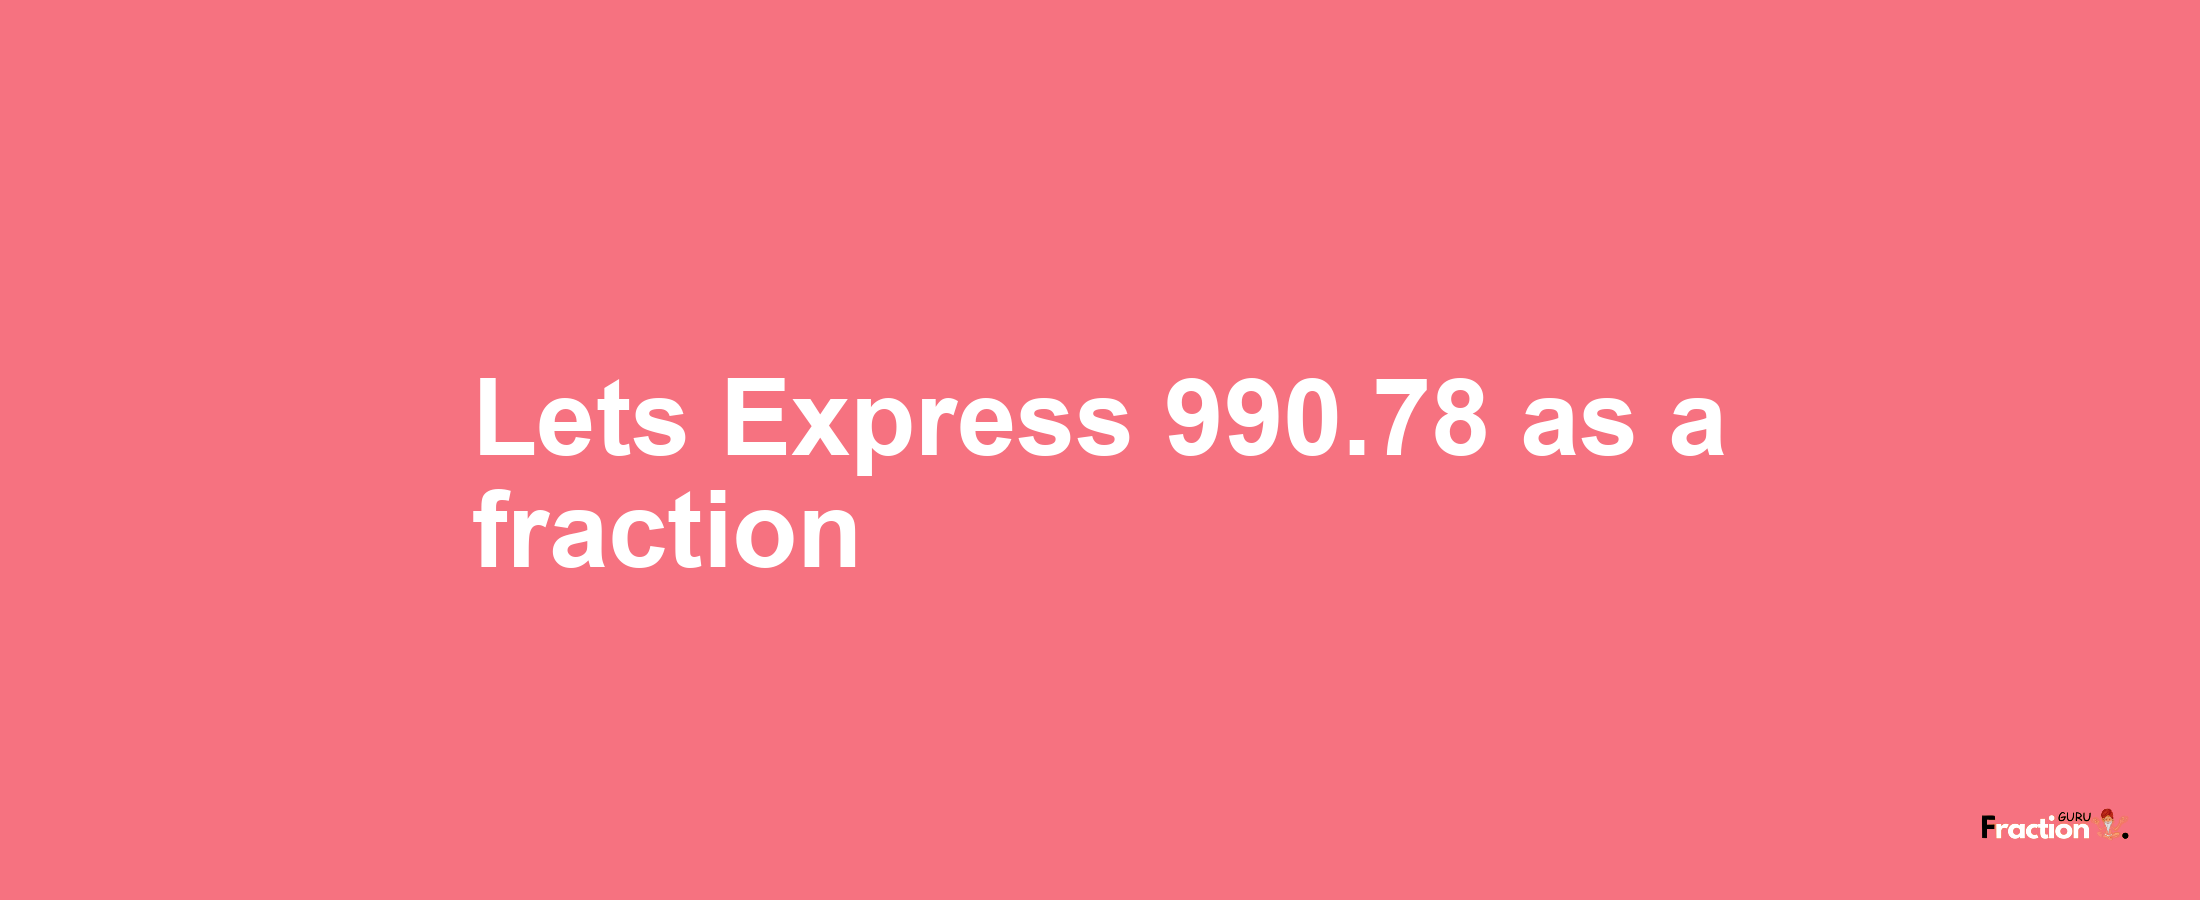 Lets Express 990.78 as afraction